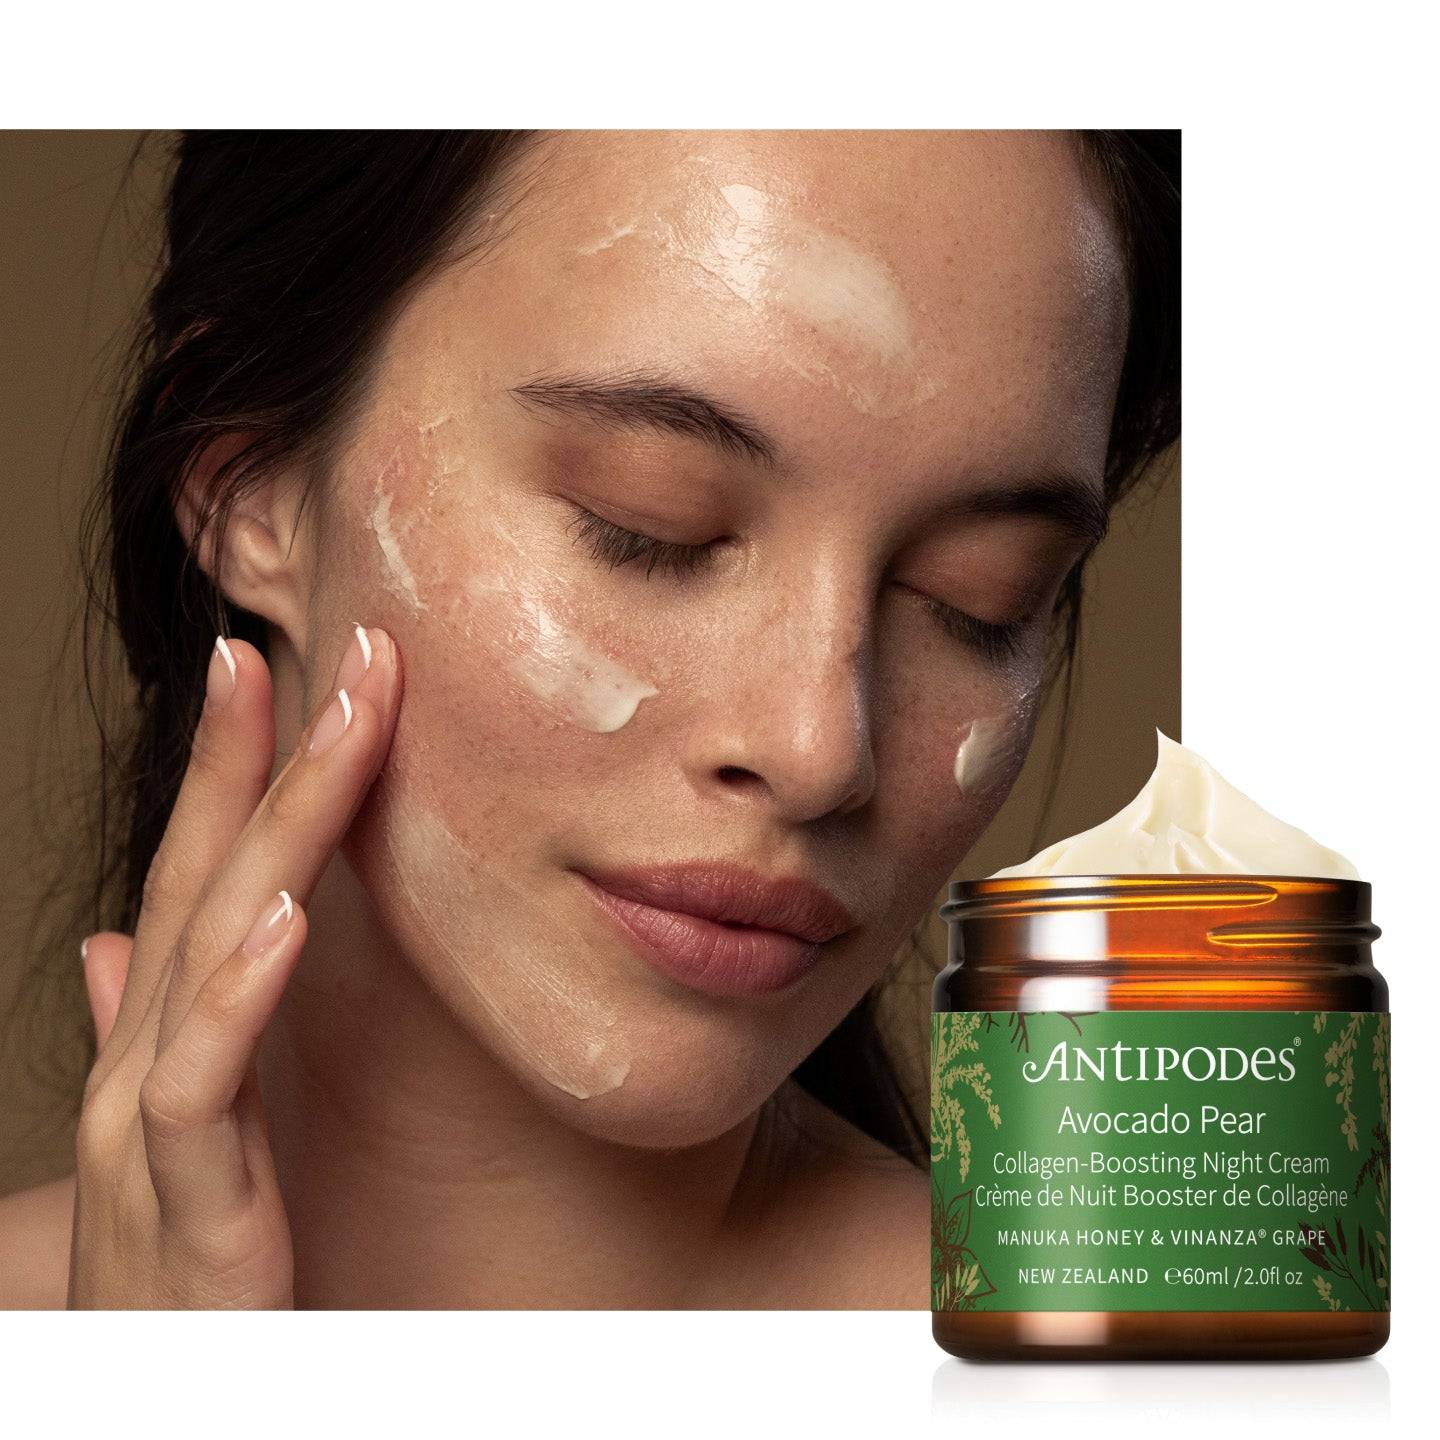 Avocado Pear night cream is .Clinically shown to: Reduce wrinkle depth by up to 22%* Reduce skin roughness by 34%* Reduce skin dryness by up to 85.7%*.